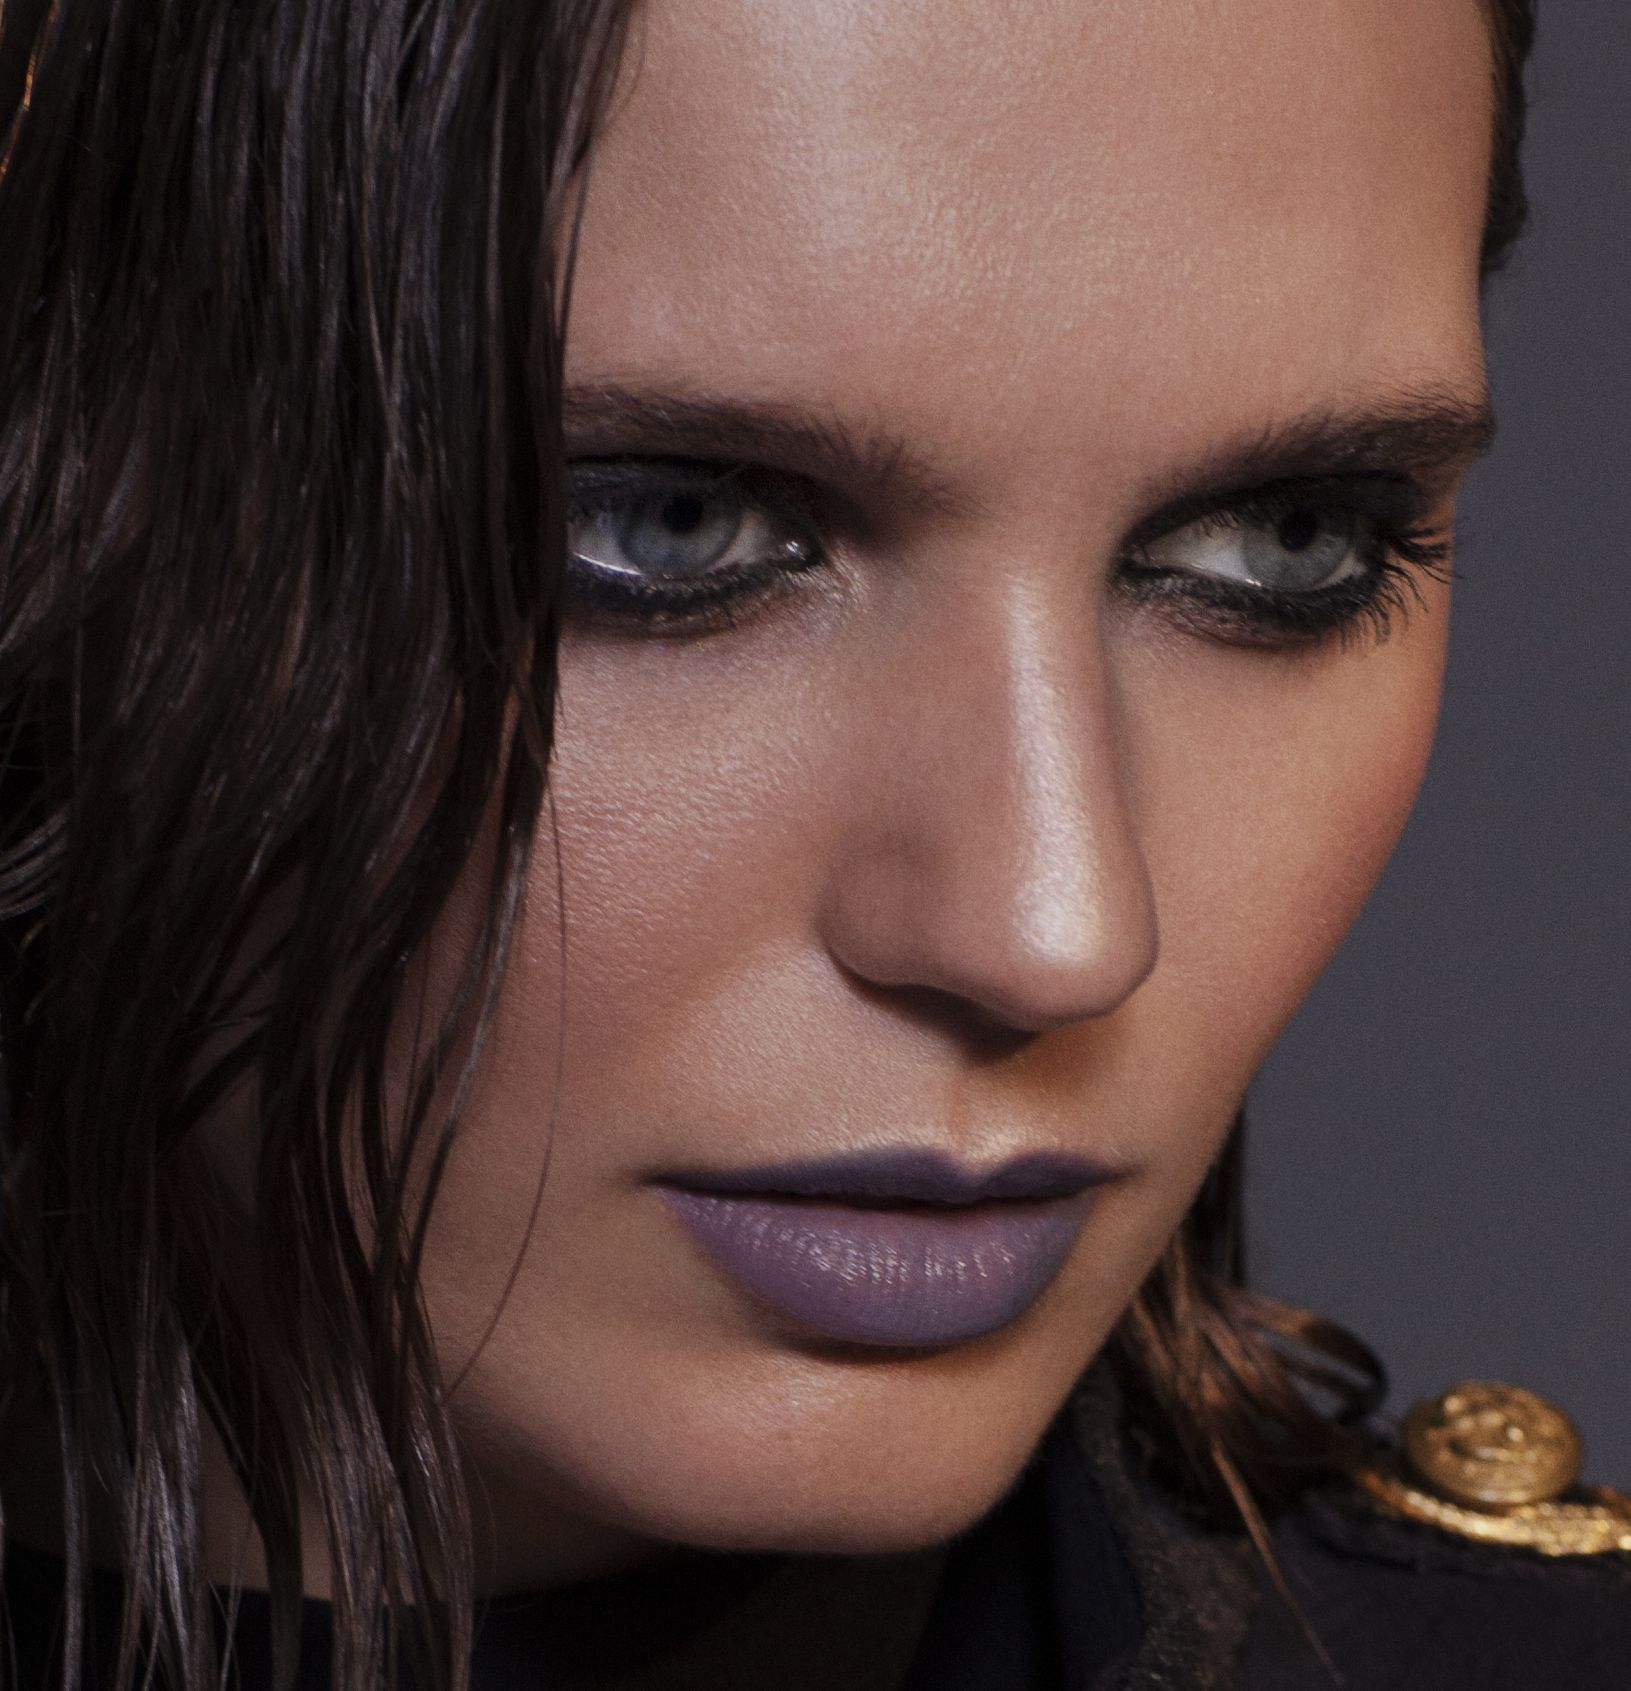 Pirate Eye Makeup Create Your Own Take On The Smokey Sultry Pirate Eye With Our